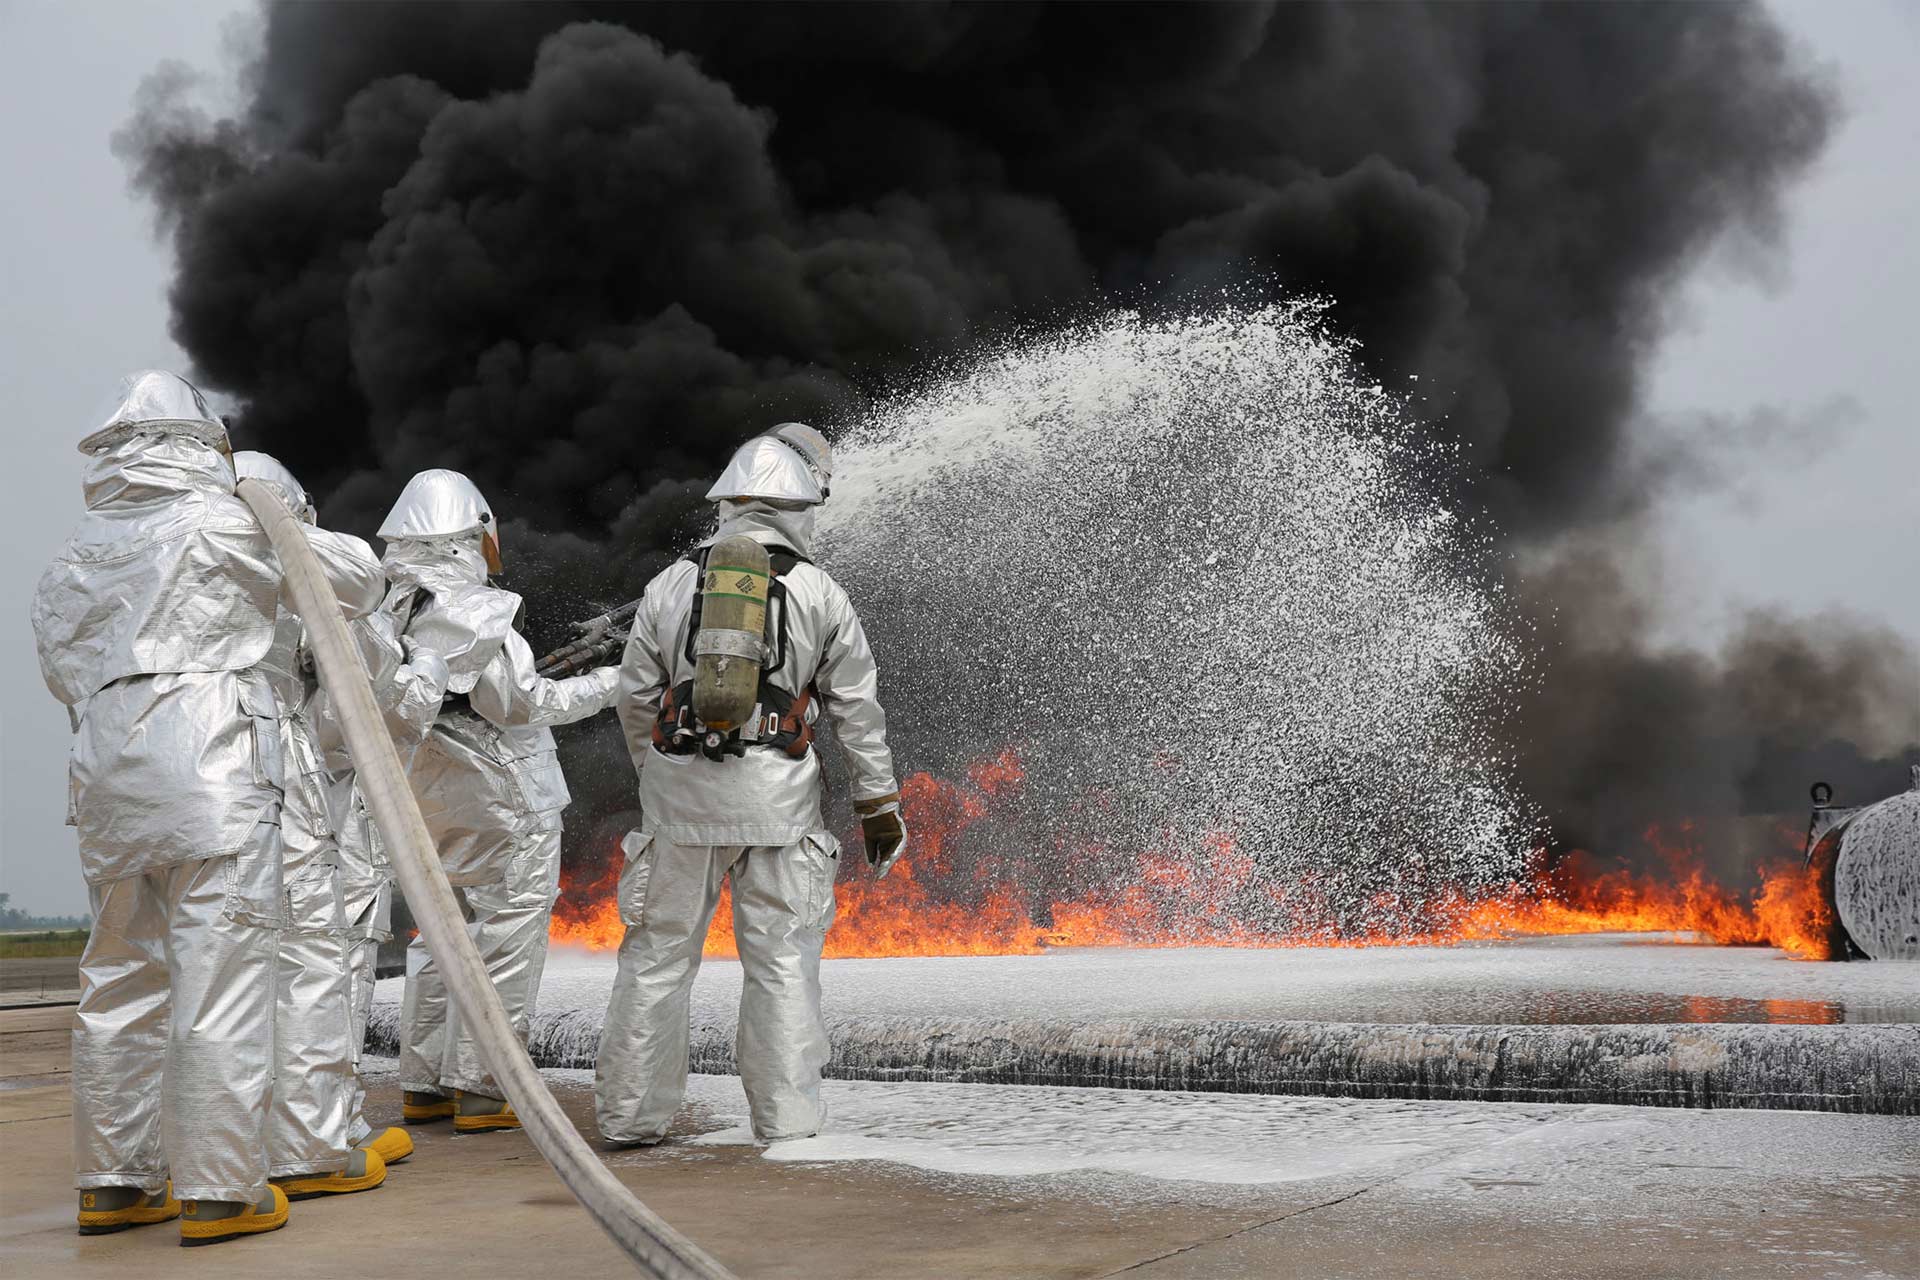 Firefighters using AFFF - Aqueous Film Forming Foam on fire